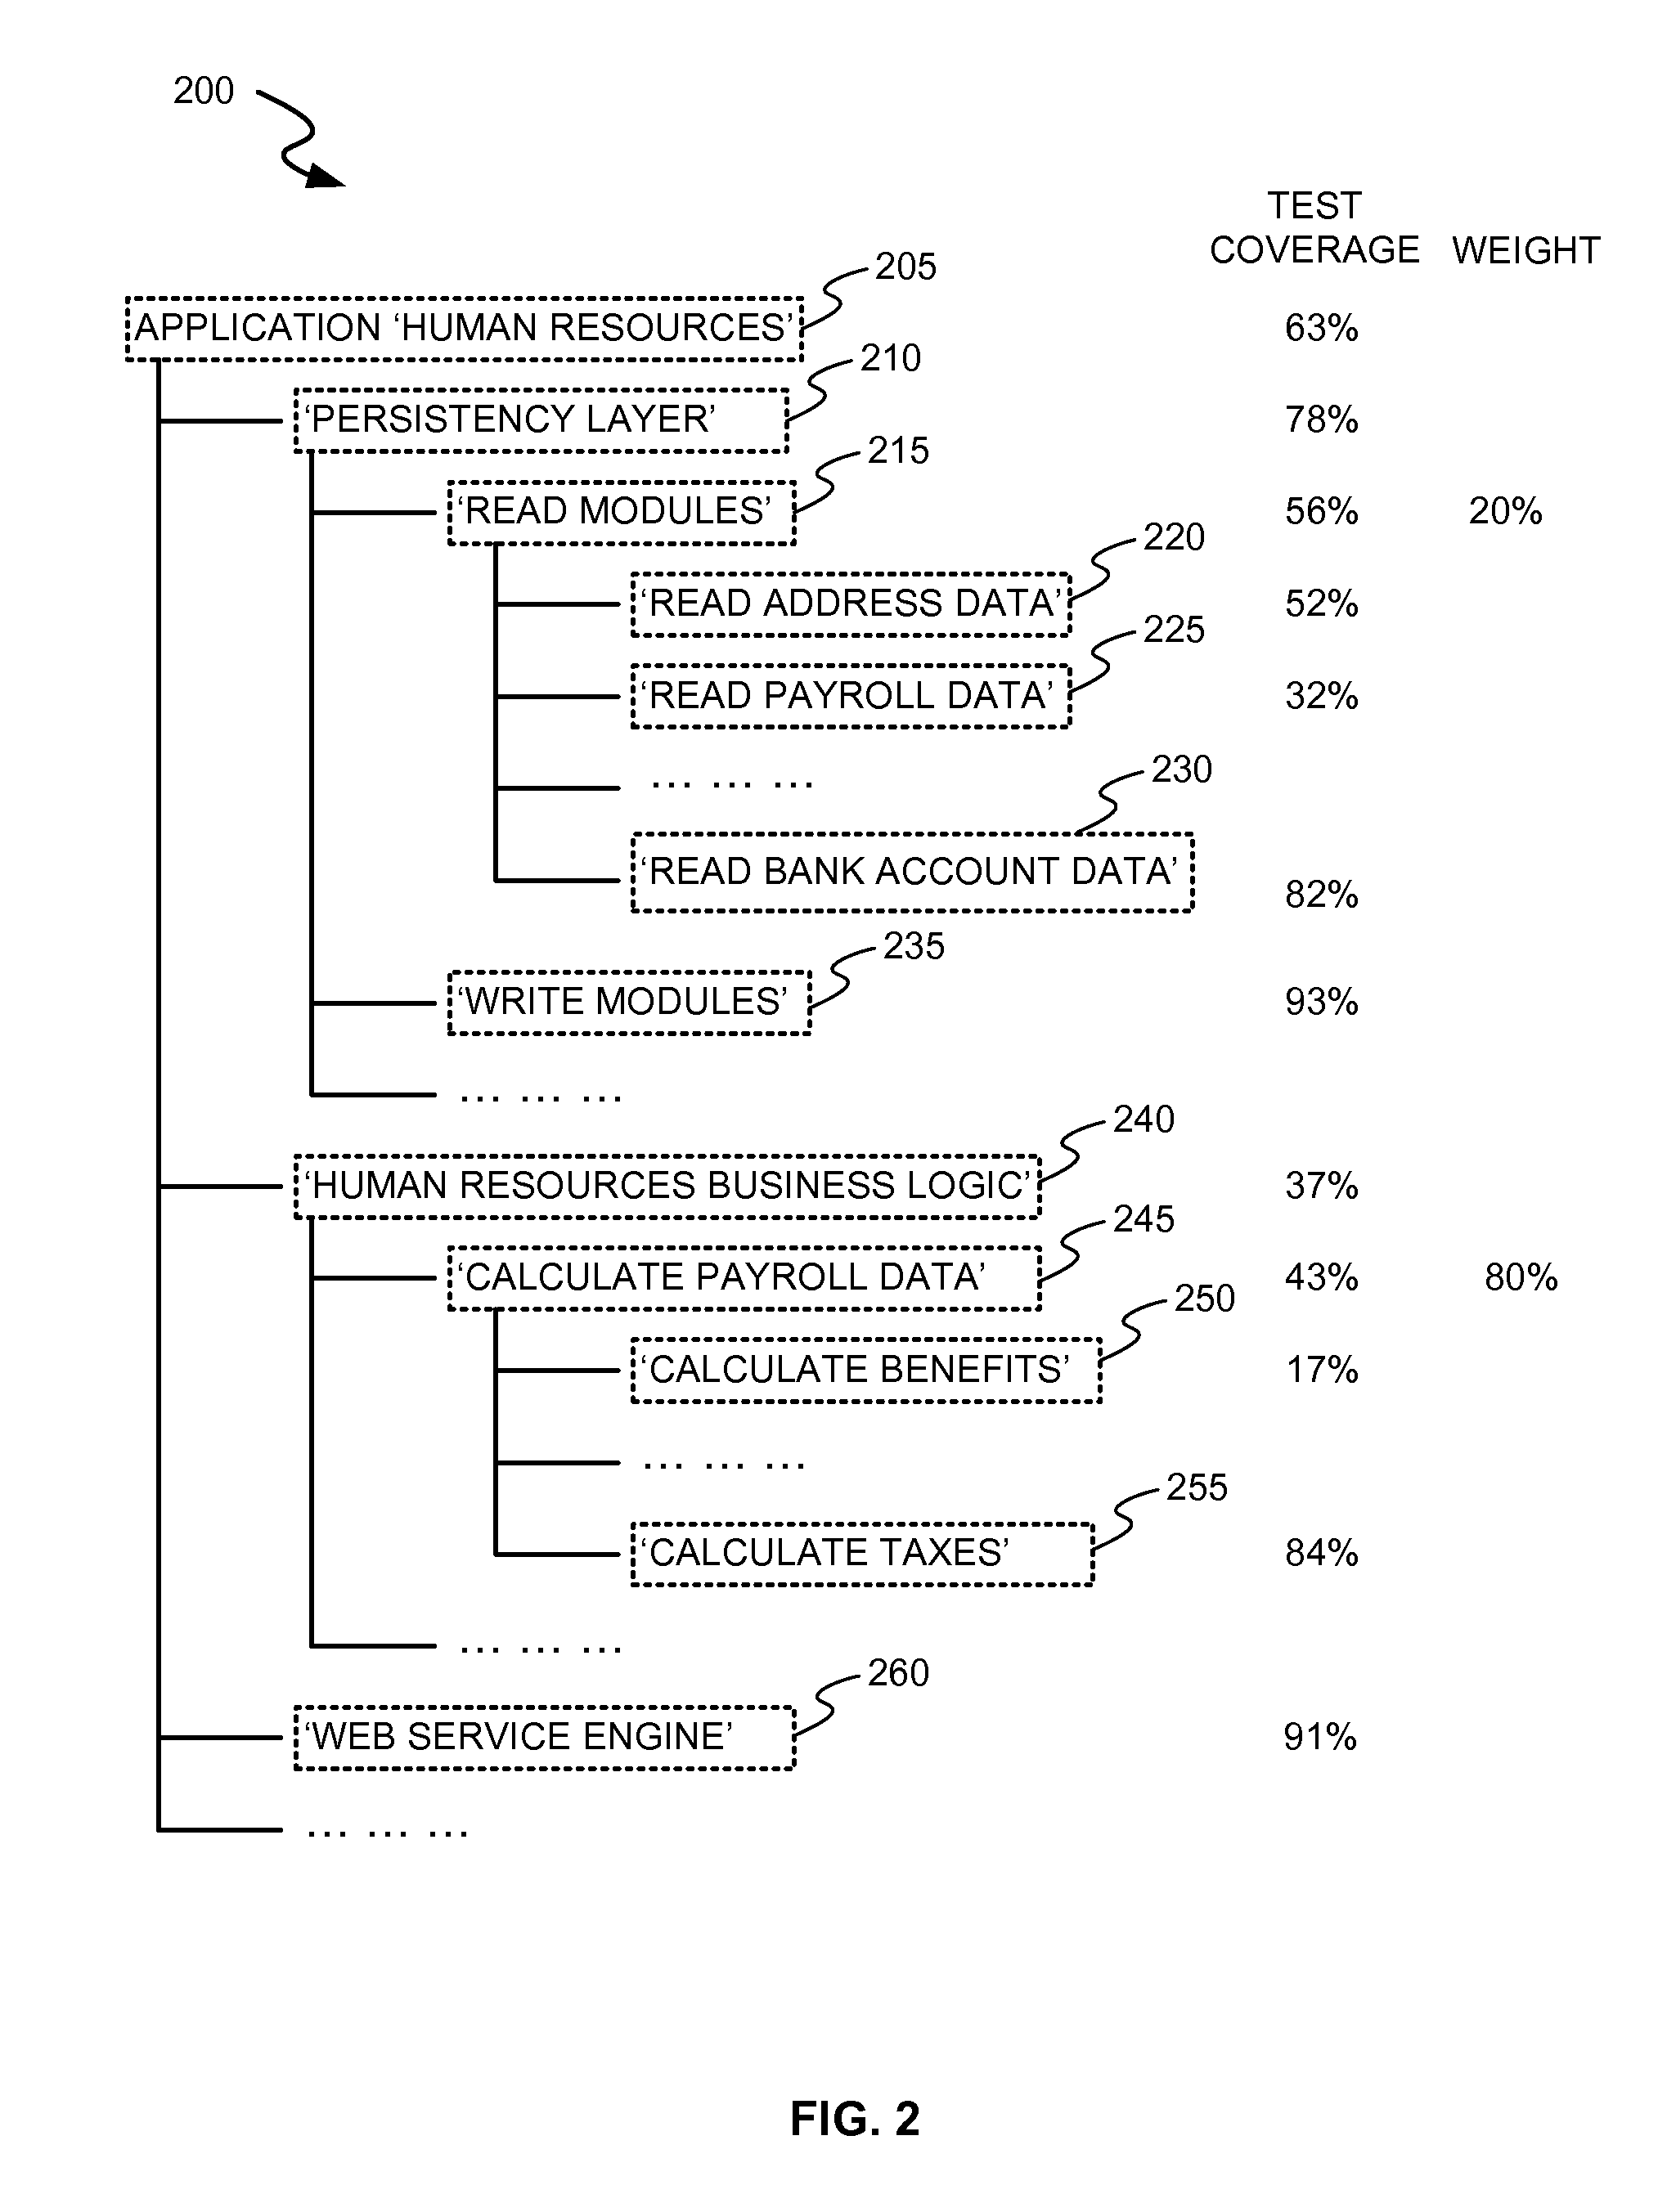 Systems and methods for analyzing test coverage at an organizational level